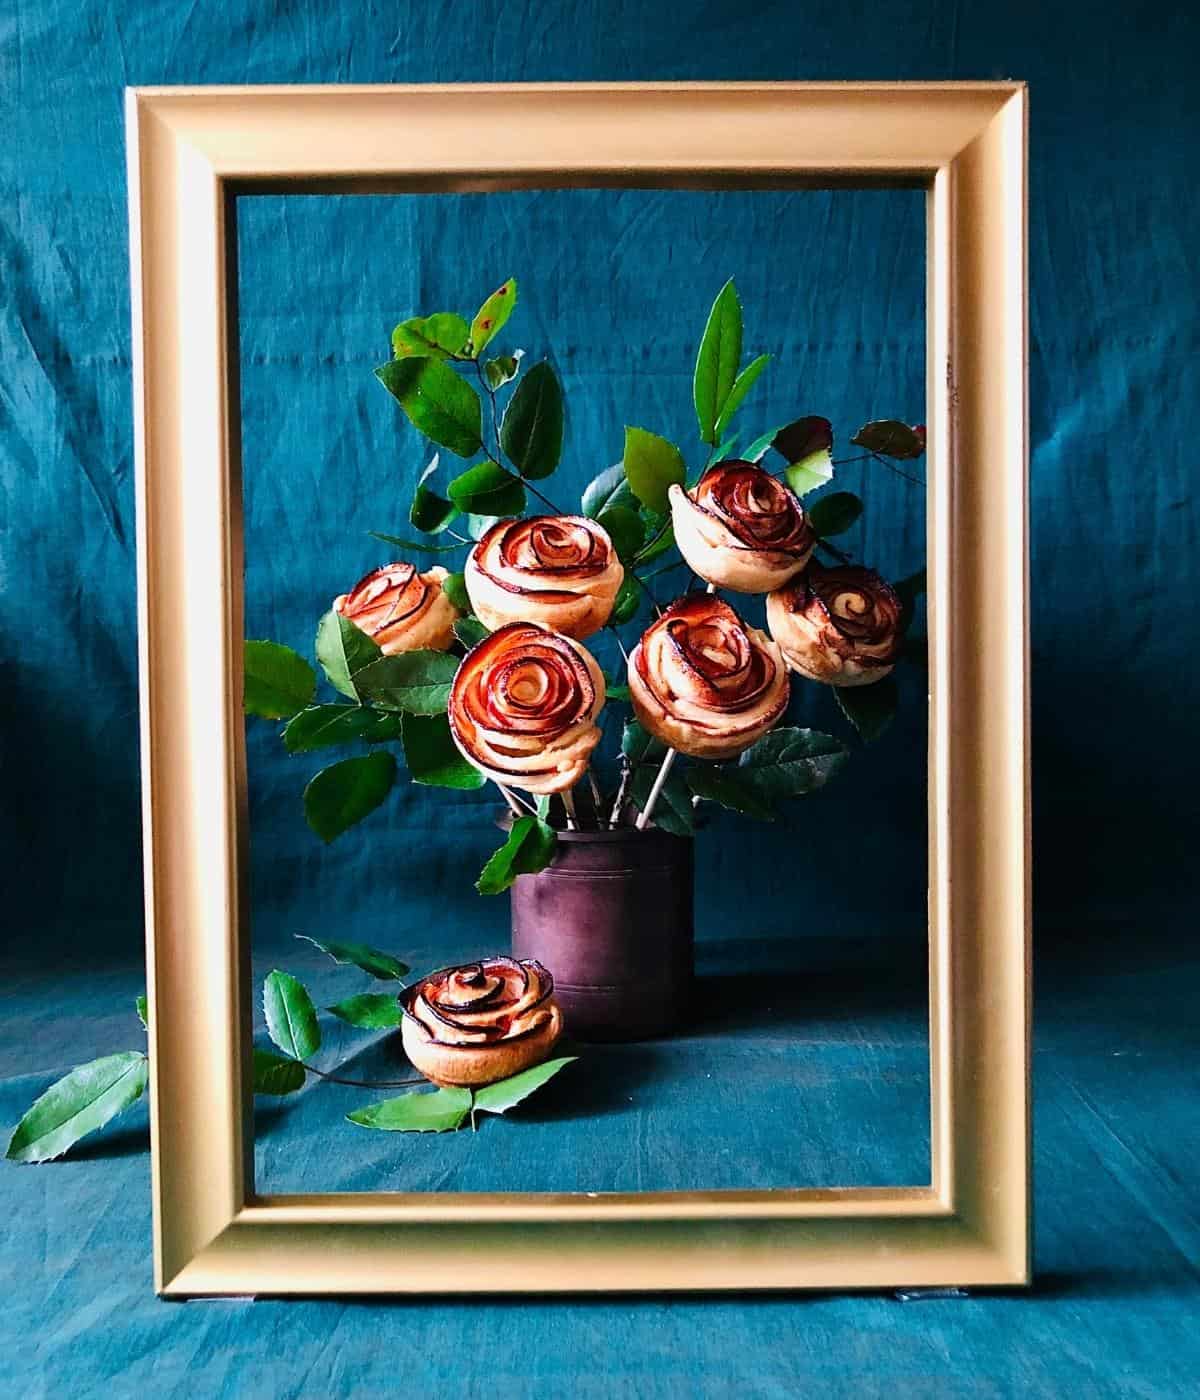 Pastry apple roses in a vase framed by a picture frame